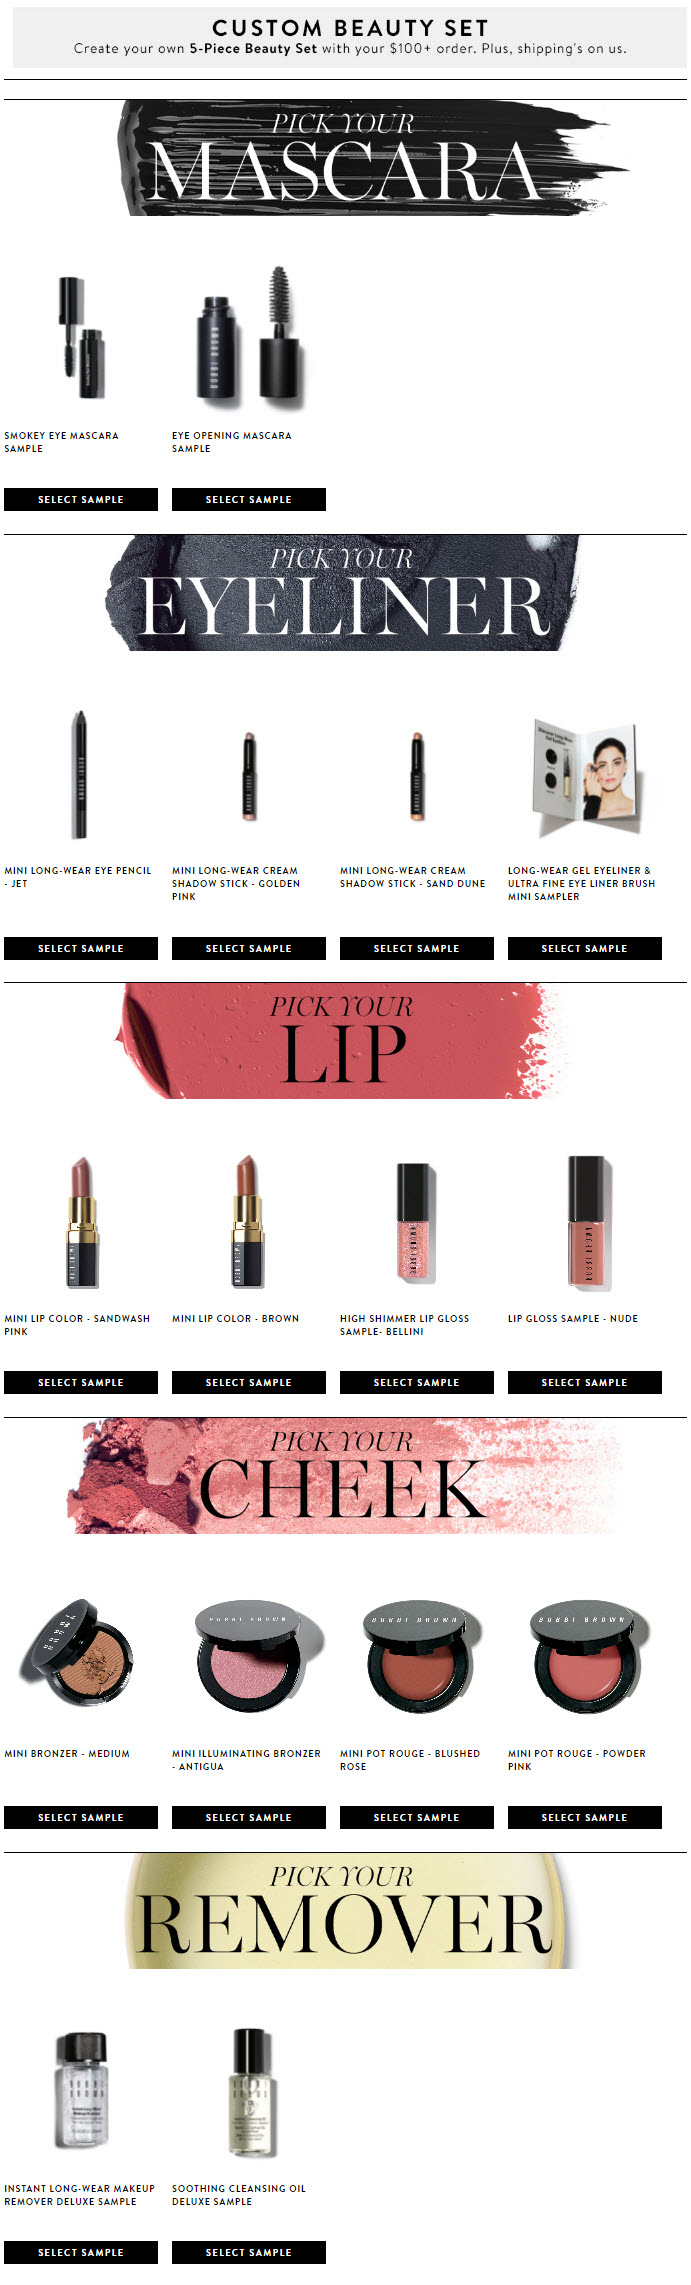 Receive a free 5-piece bonus gift with your $100 Bobbi Brown purchase